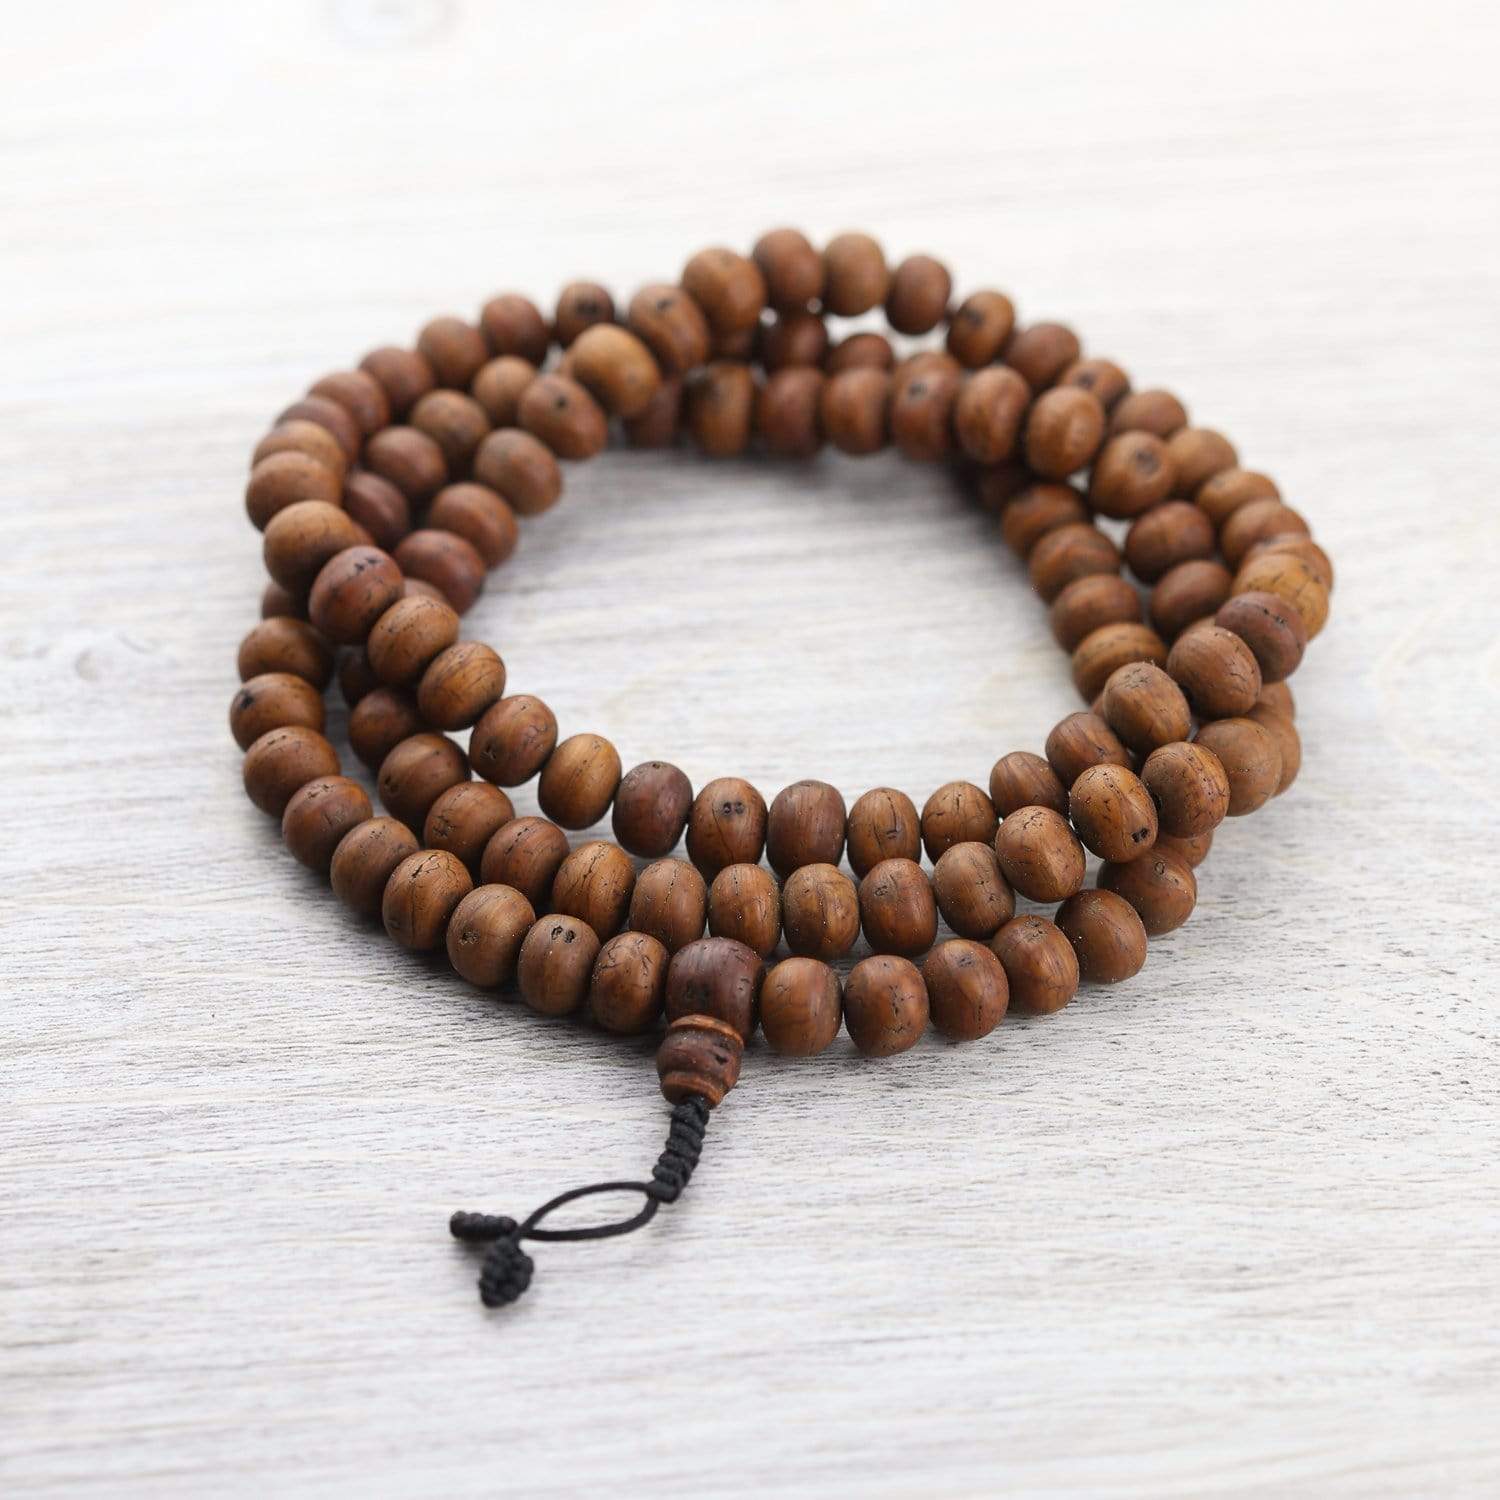 Mendicant Wood Buddhist Monk Necklace, Square Wood Beads & Carved Chinese  Wood Beads, Ethnic Organic Buddhist Necklace Set by Sandradesigns -   Canada